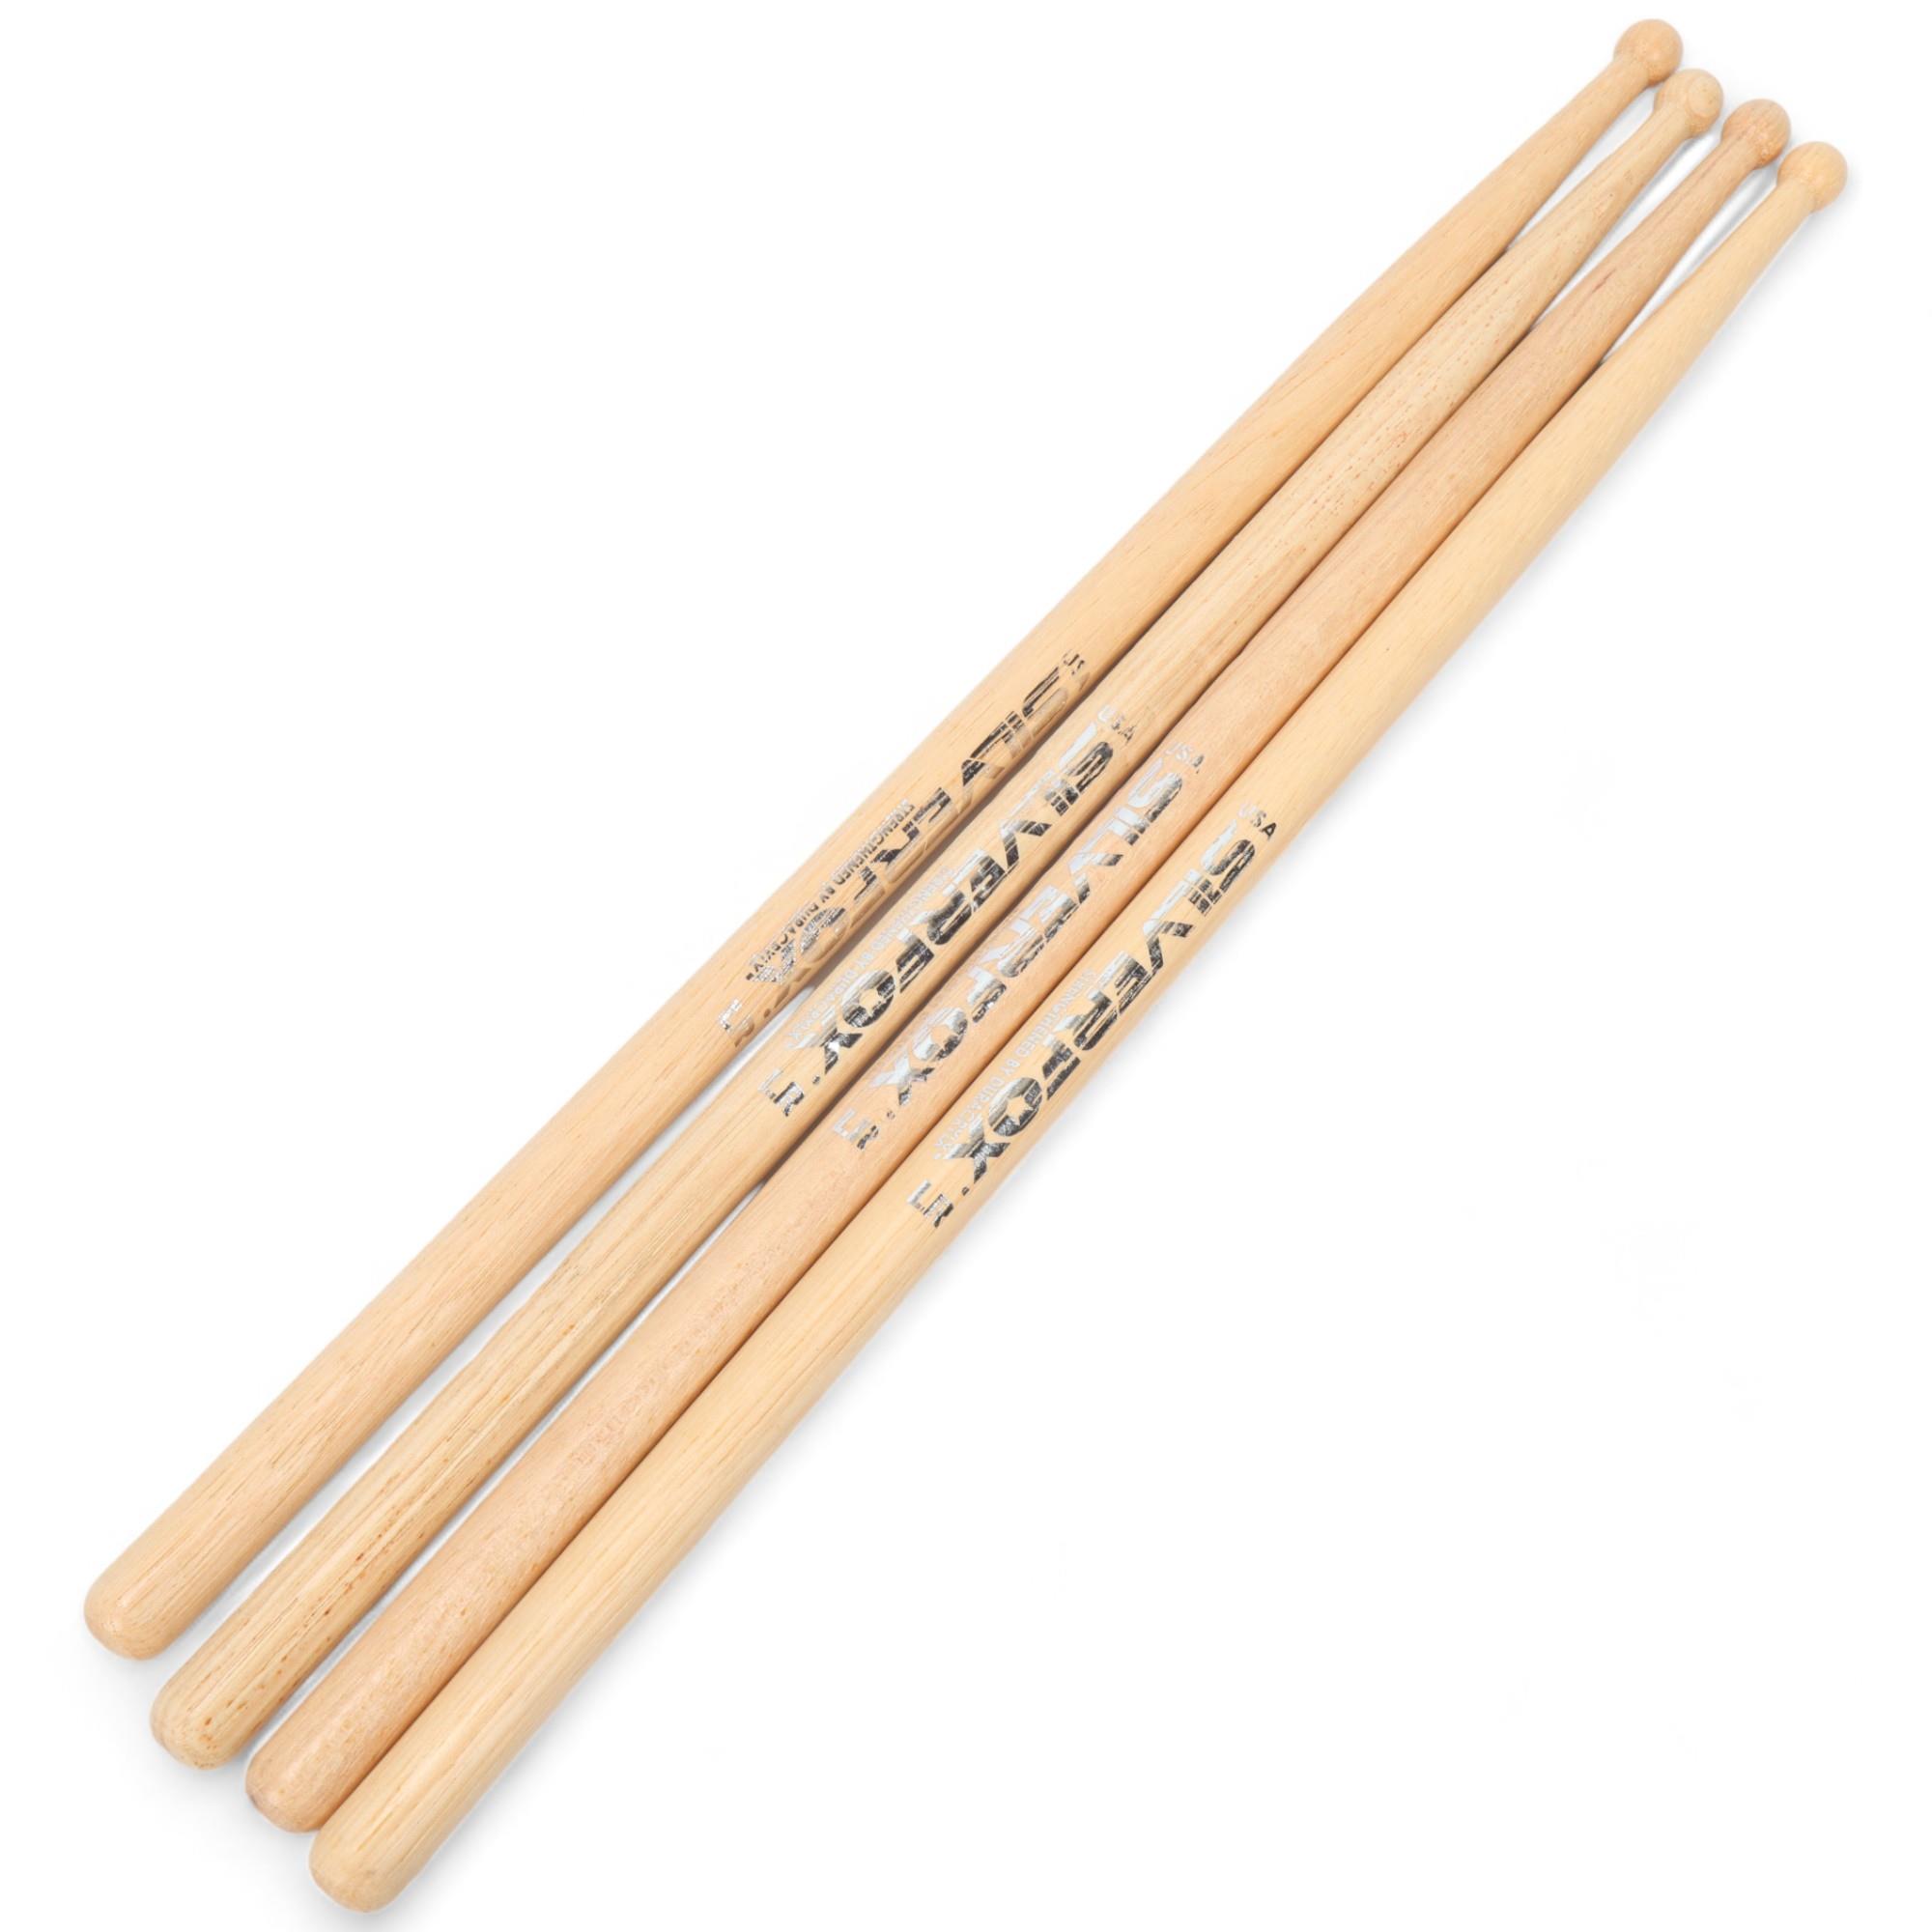 Four USED SILVERFOX LR Hickory DRUMSTICKS belonging to MITCH MITCHELL.